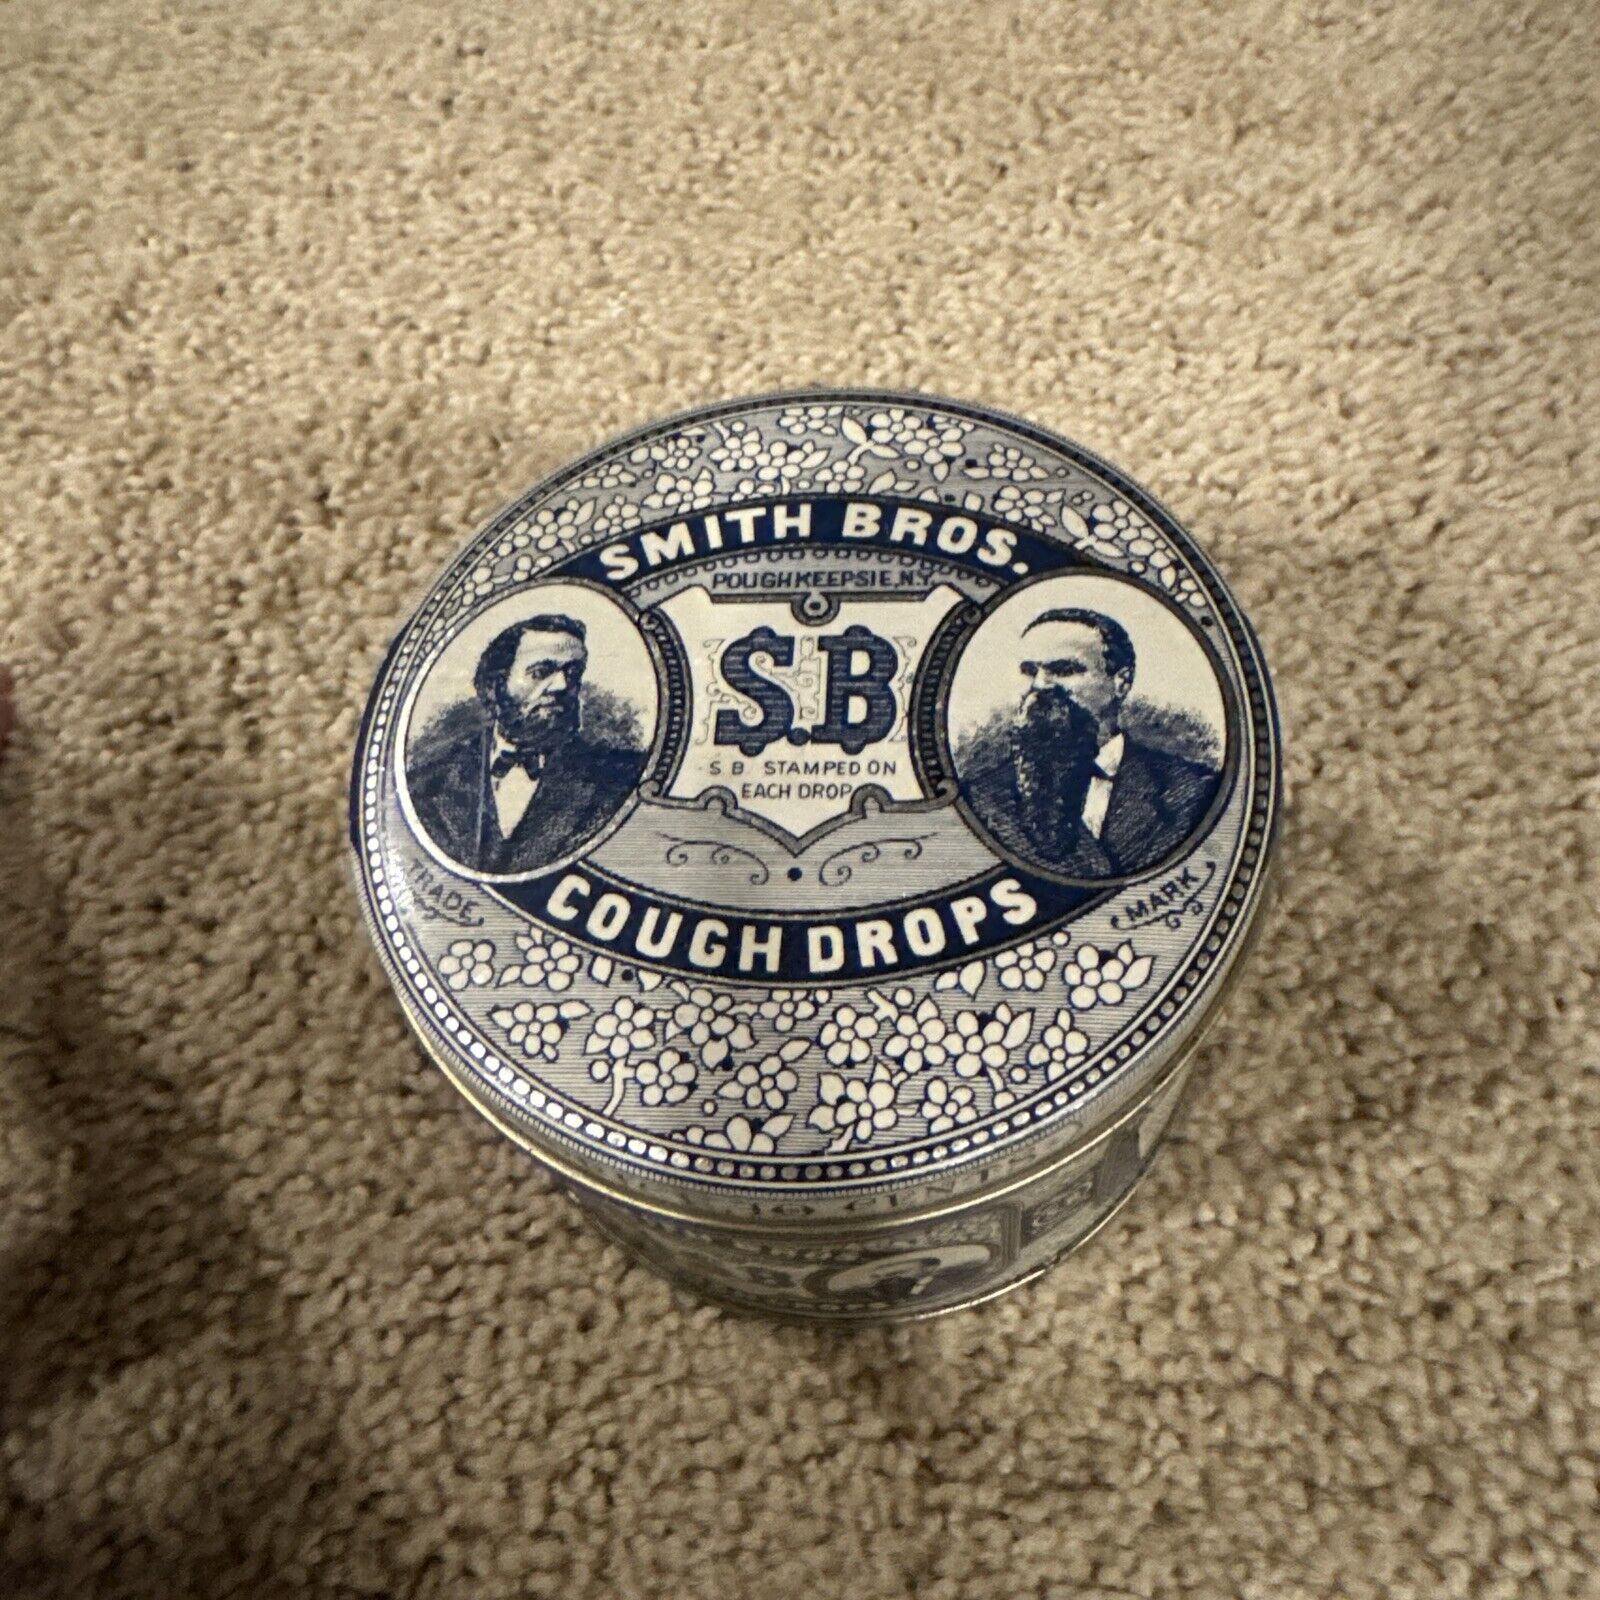 Smith Brothers Cough Drops Vintage Tin